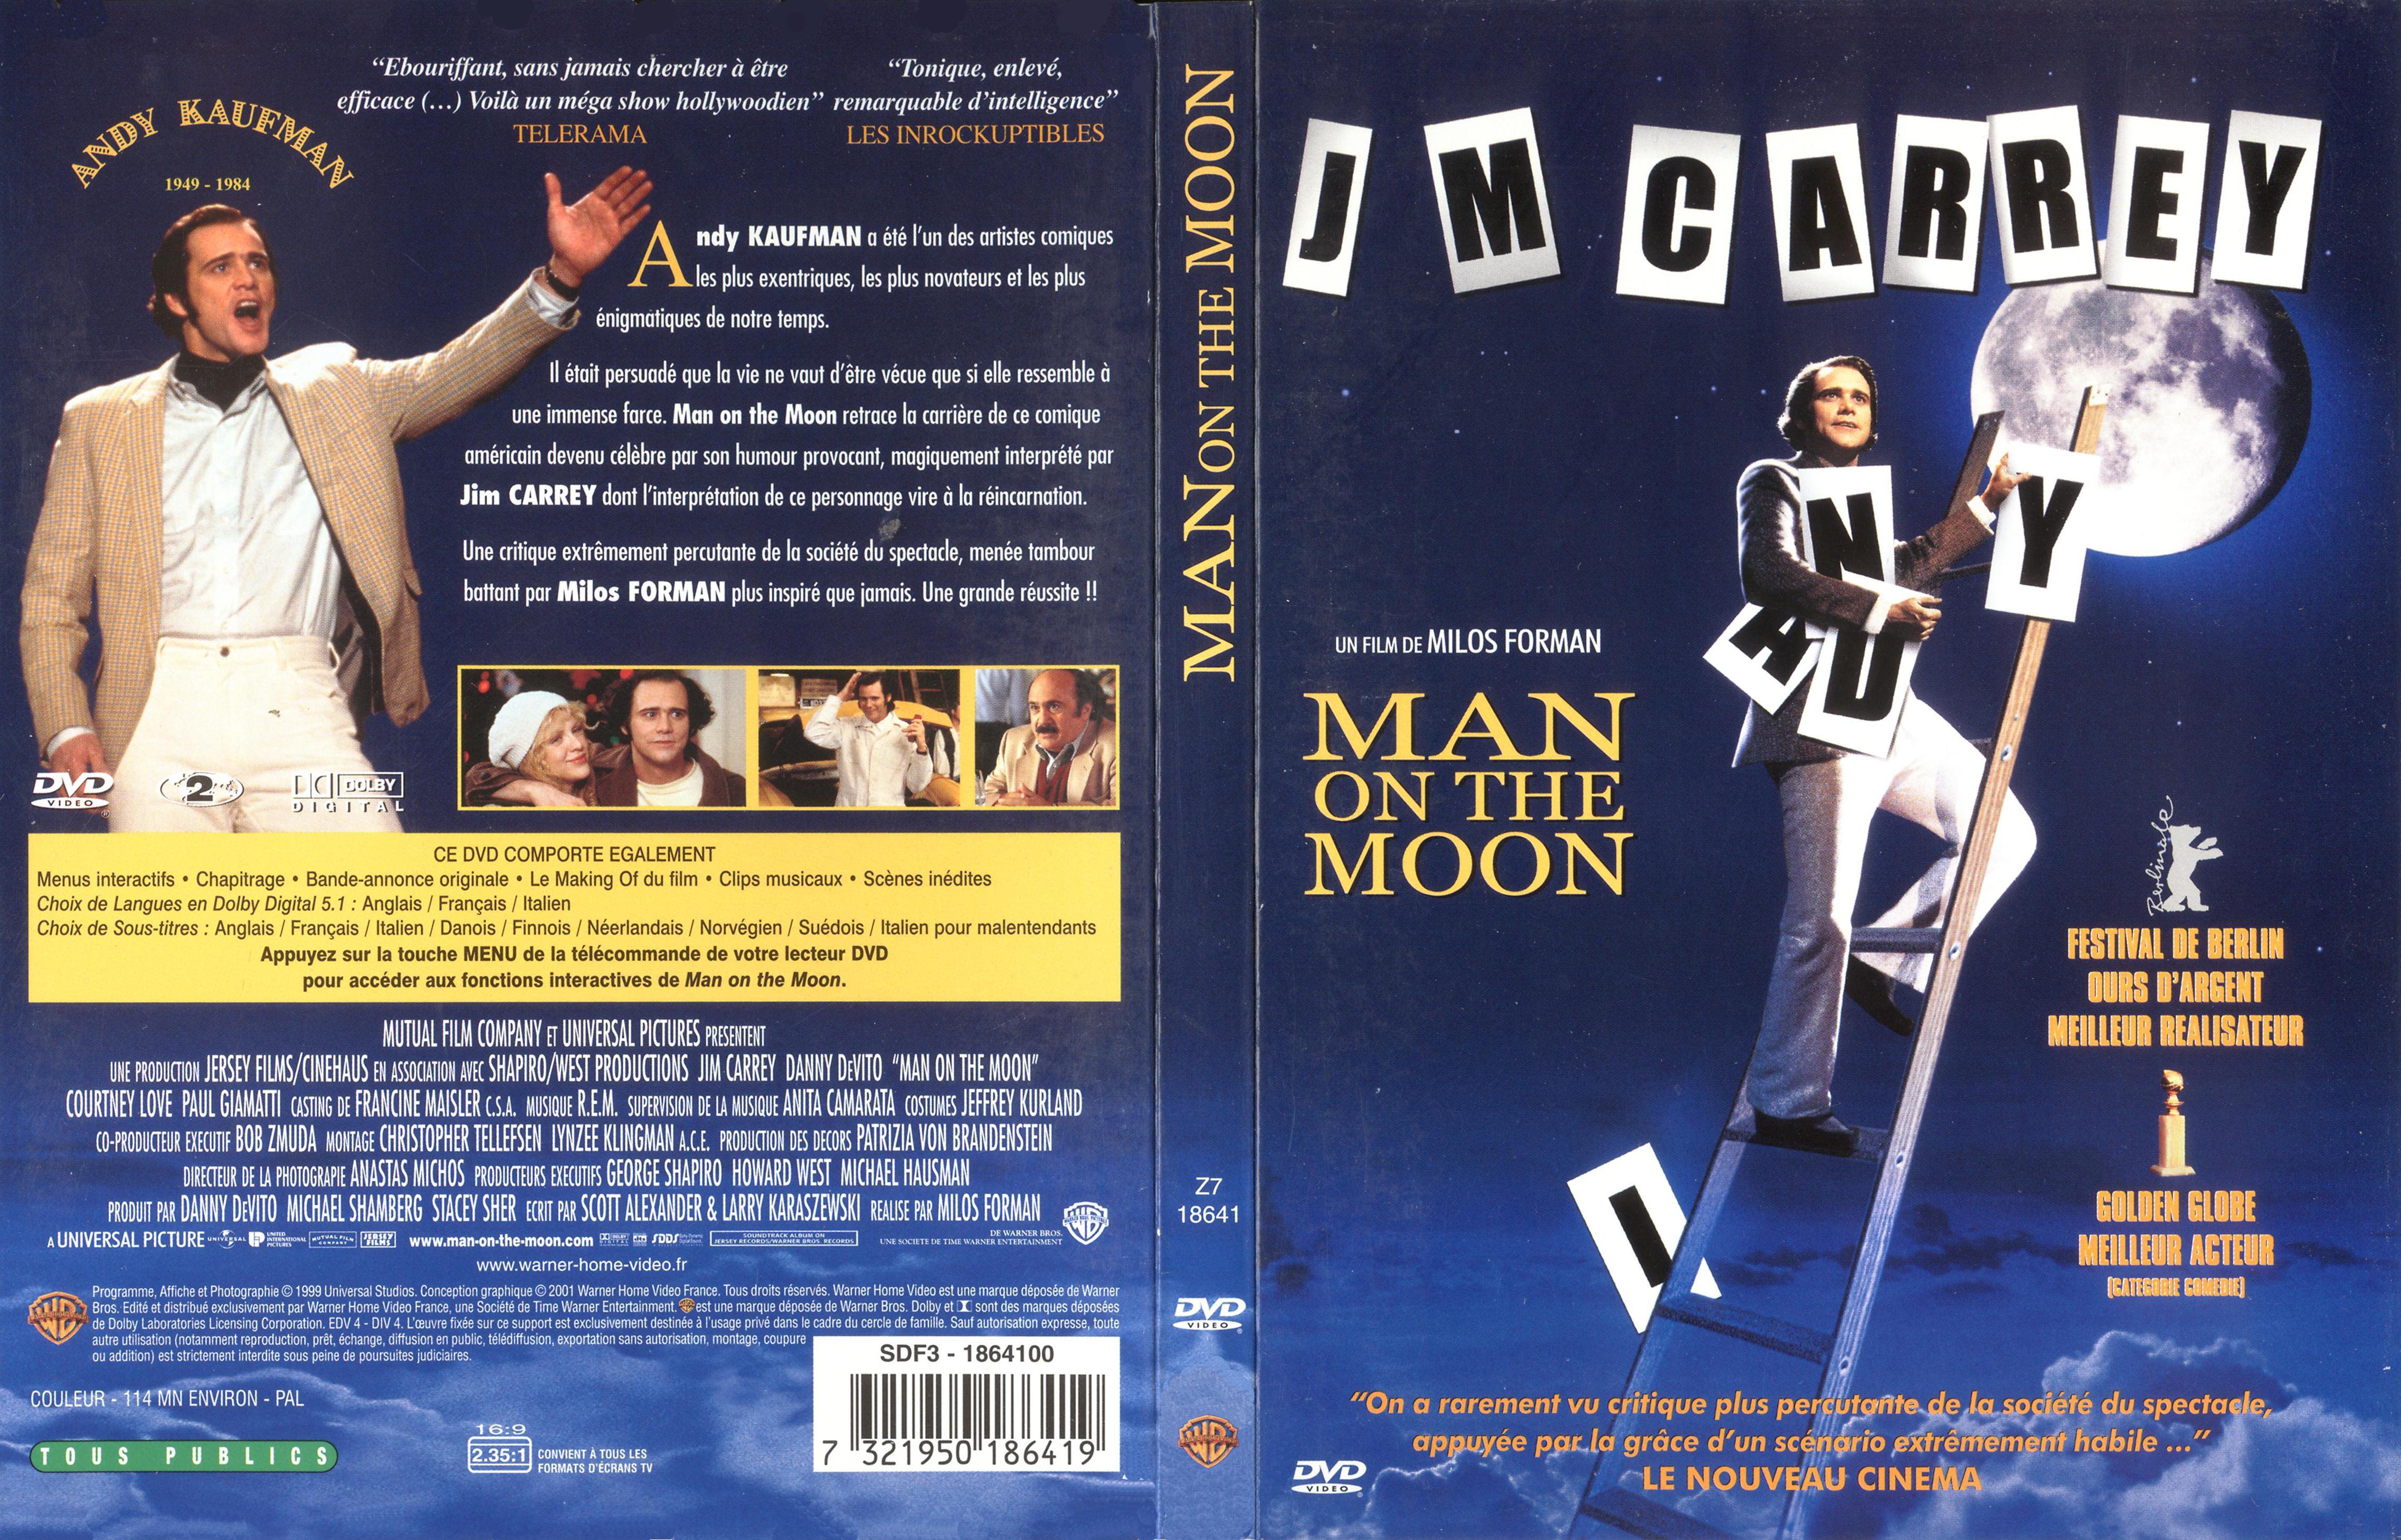 Jaquette DVD Man on the moon